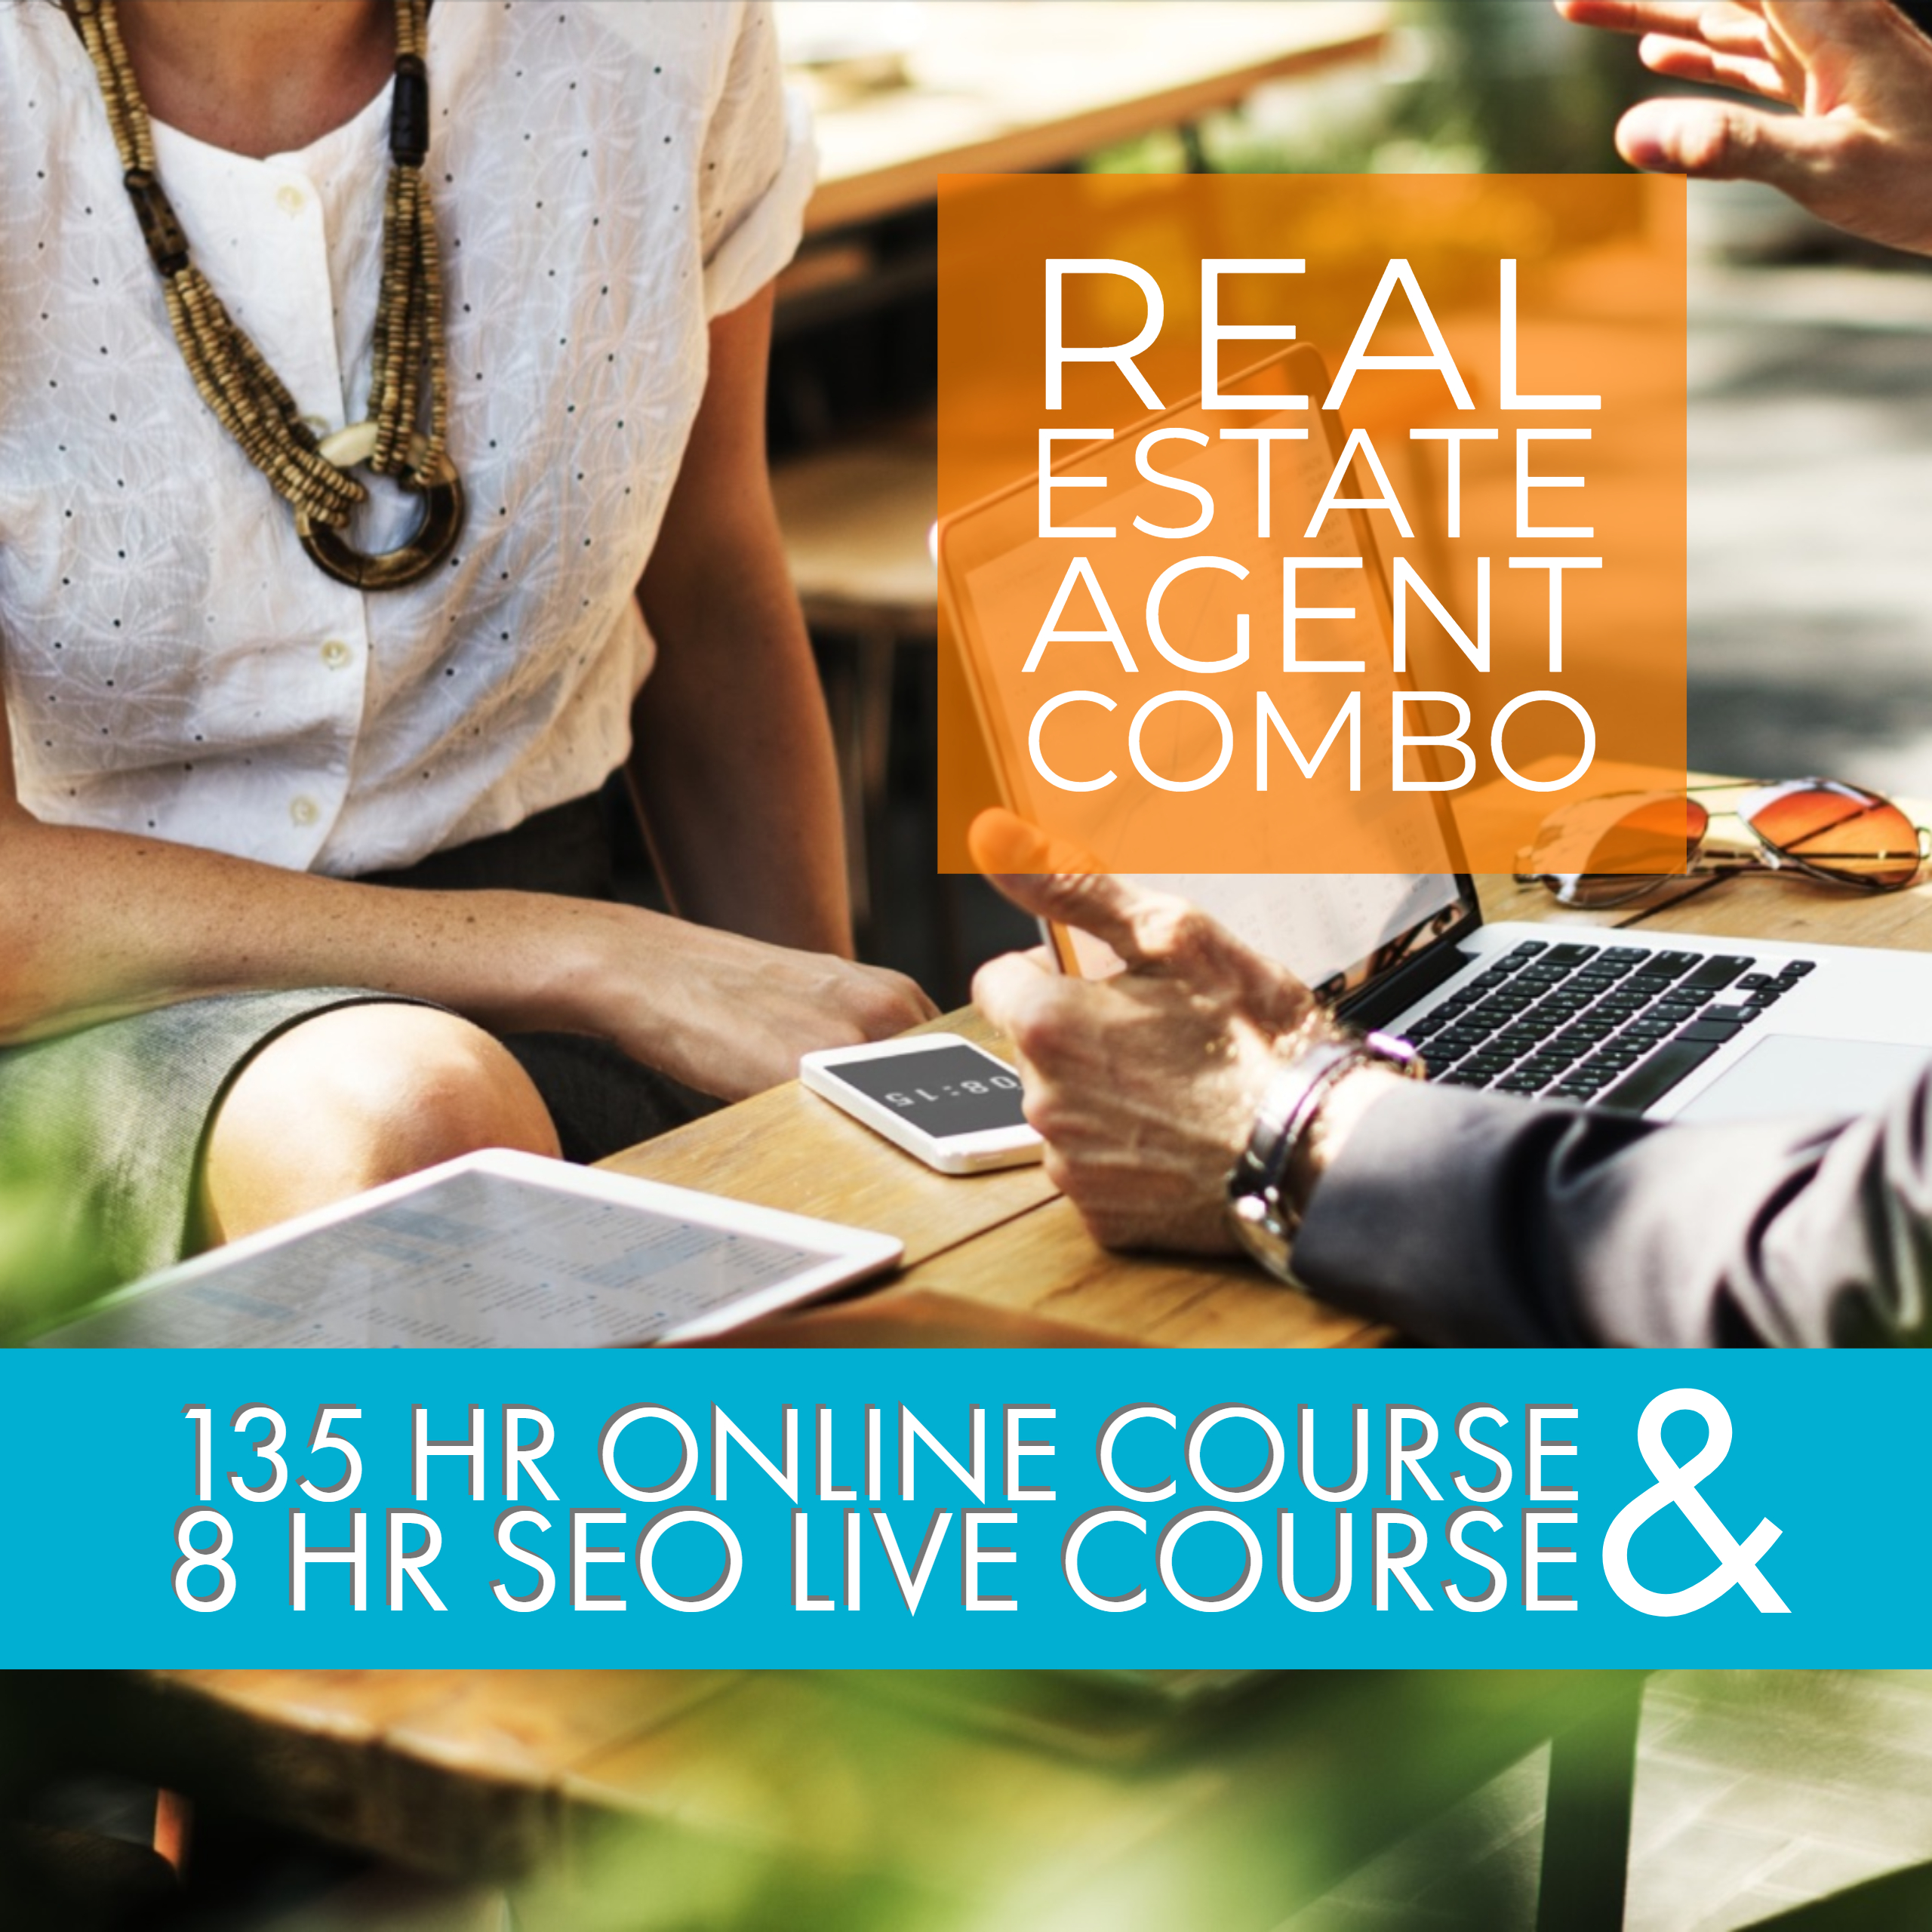 Online Real Estate Agent & Live SEO Course Combo | The CORE